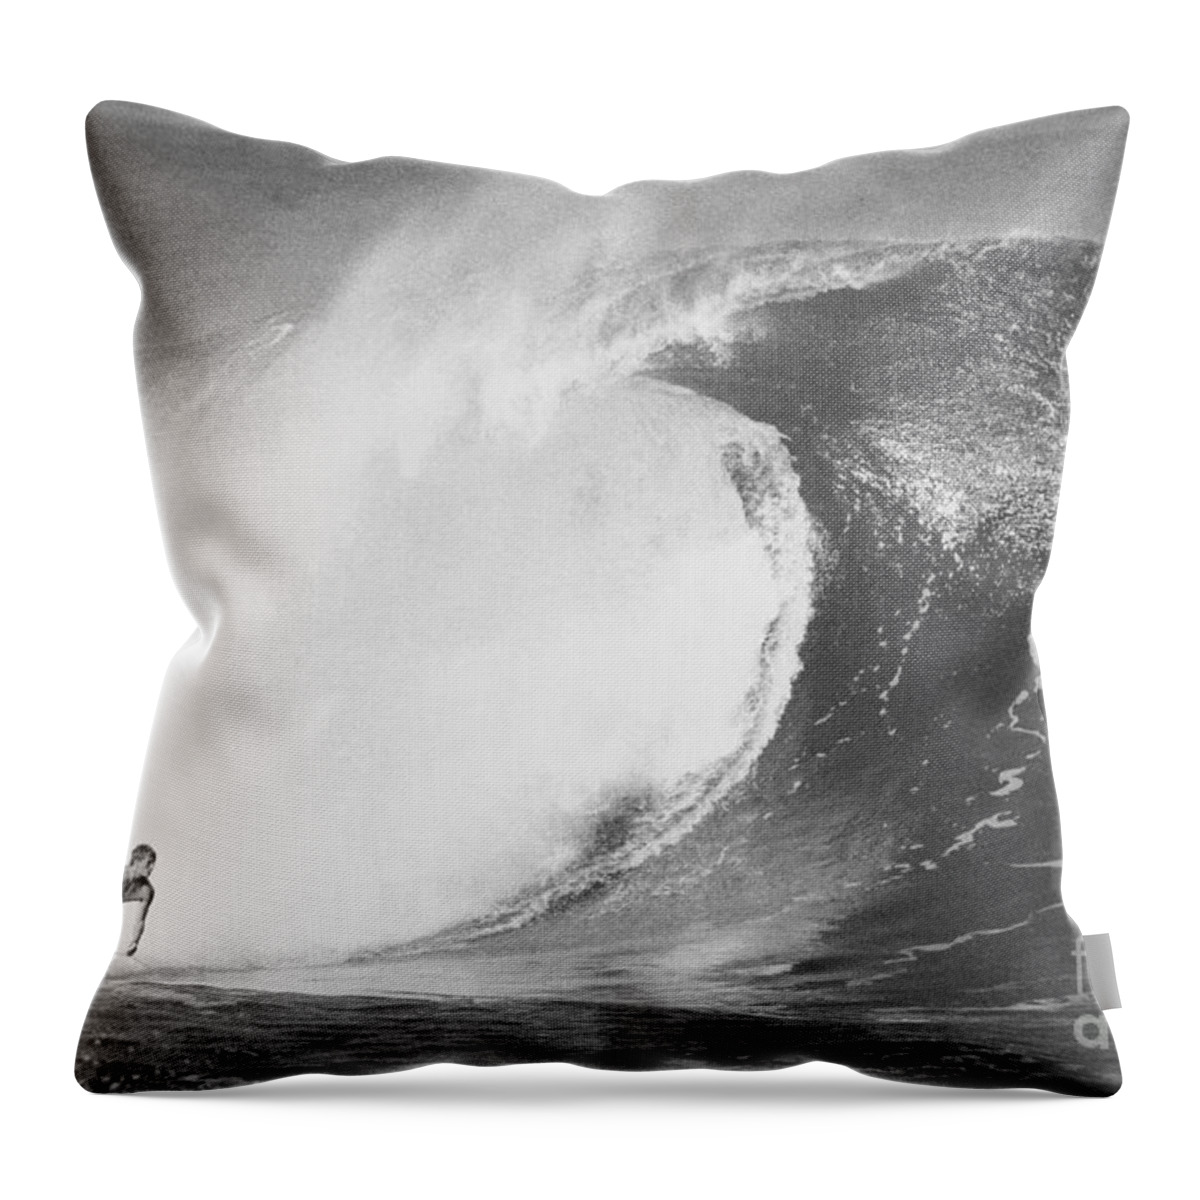 Surfer Surfing a Big Wave at Pipeline Hawaii Throw Pillow by Paul Topp -  Pixels